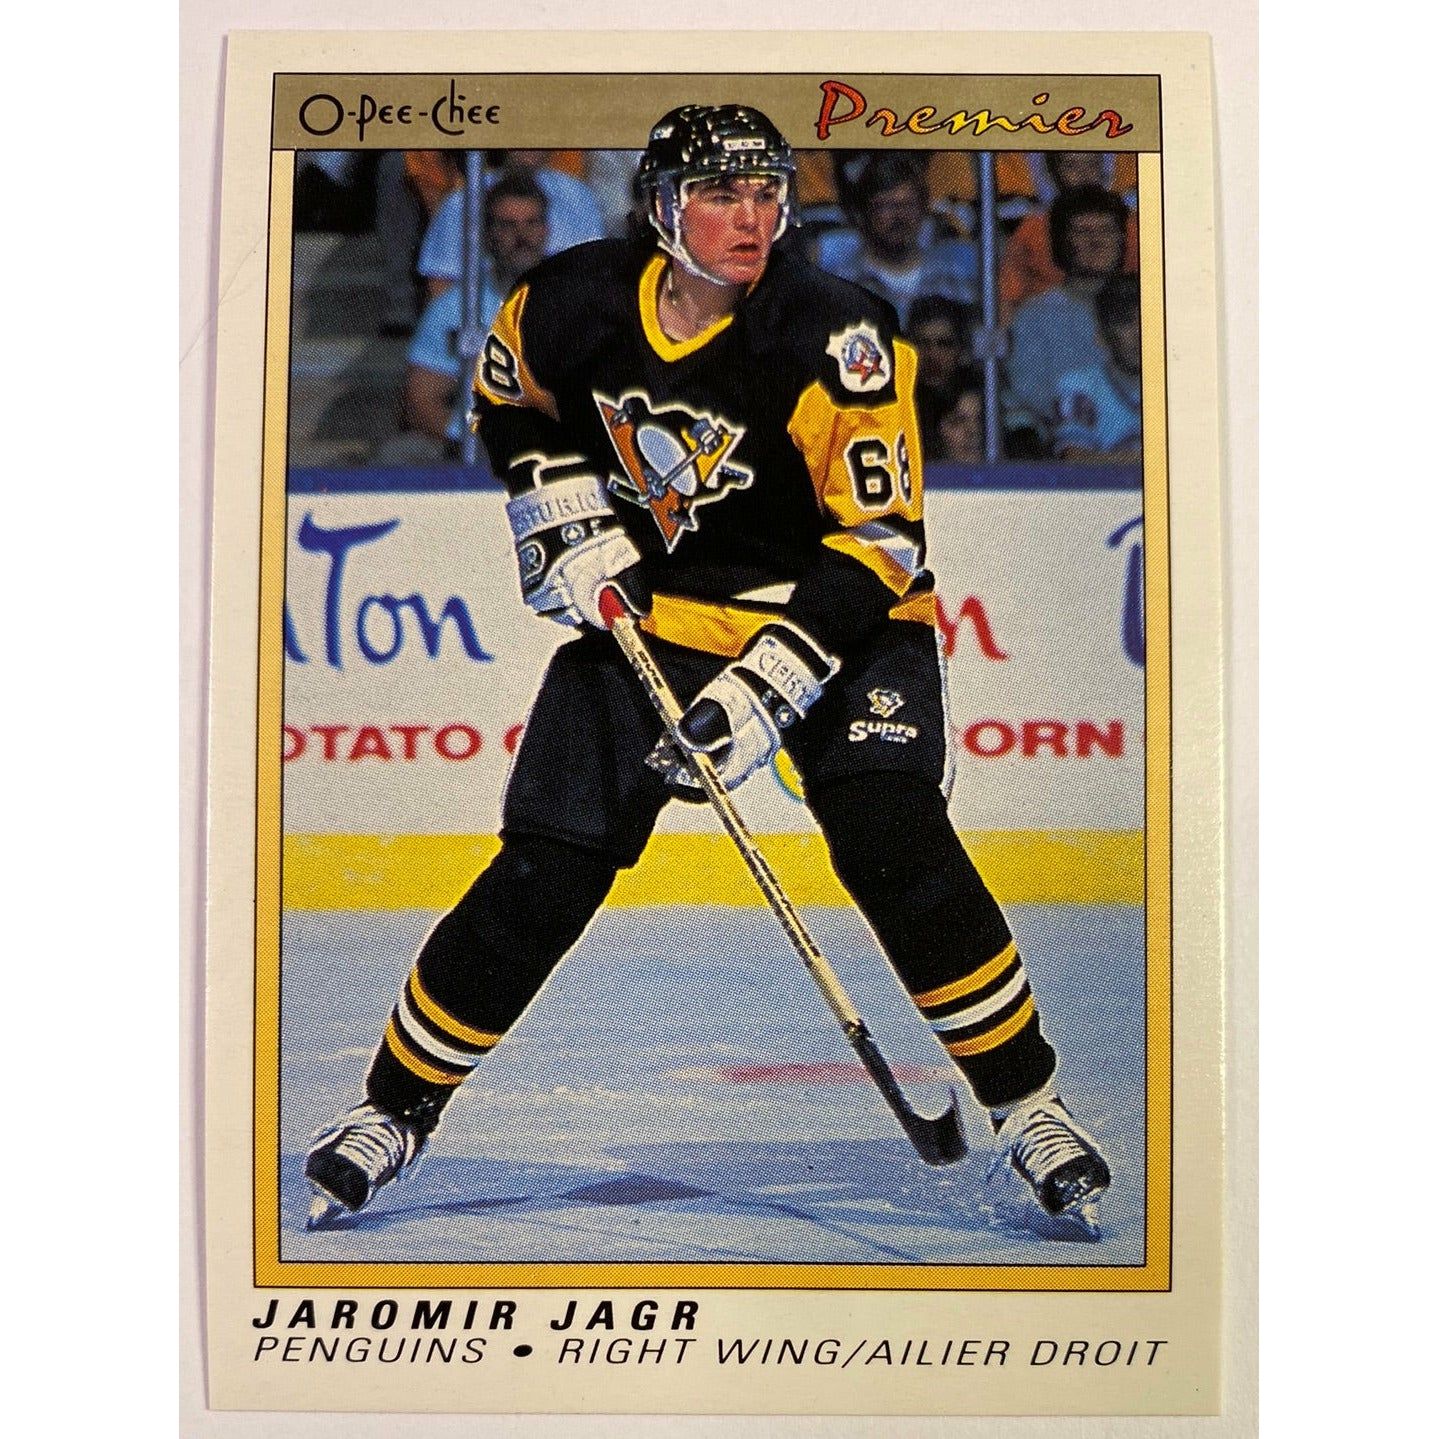  1991 O-Pee-Chee Premier Jaromir Jagr Rookie Card  Local Legends Cards & Collectibles